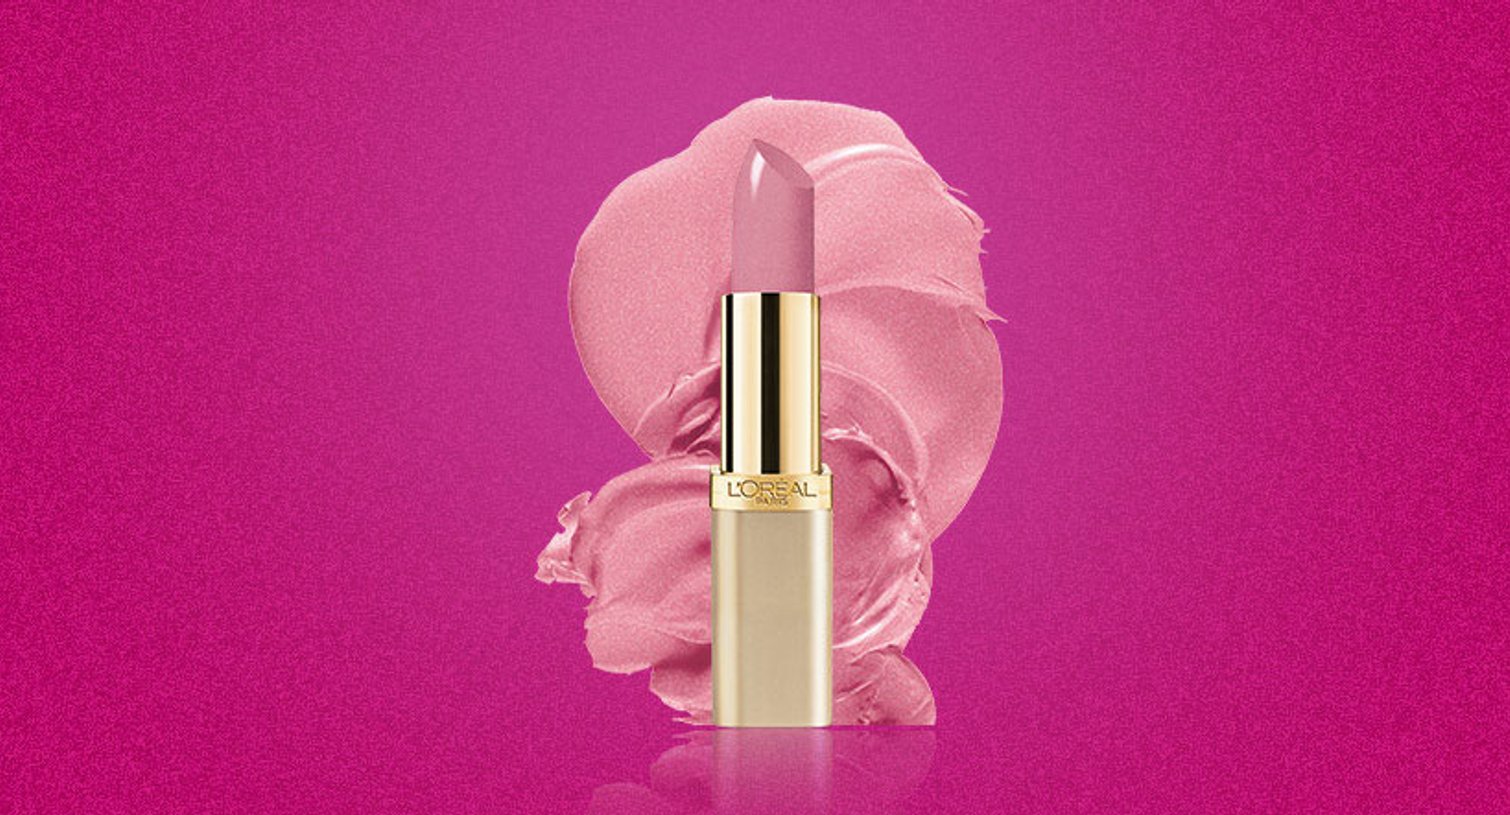 Loreal Paris BMAG Slideshow Our 20 Best Pink Lipsticks for Every Skin Tone Slide6